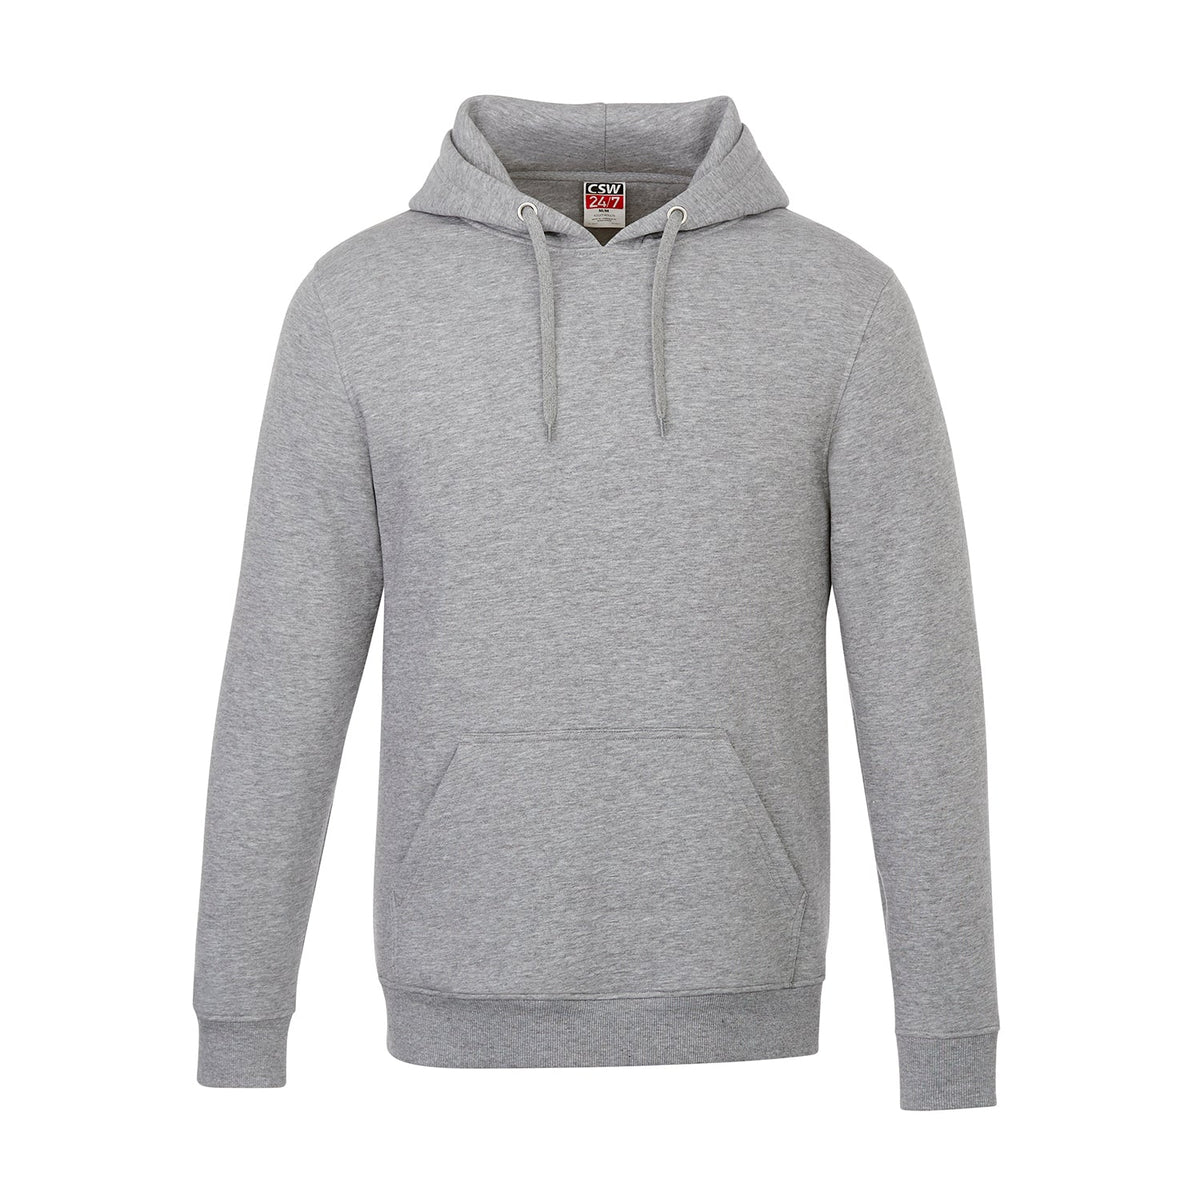 CSW 24/7 Youth Pullover Hoodie